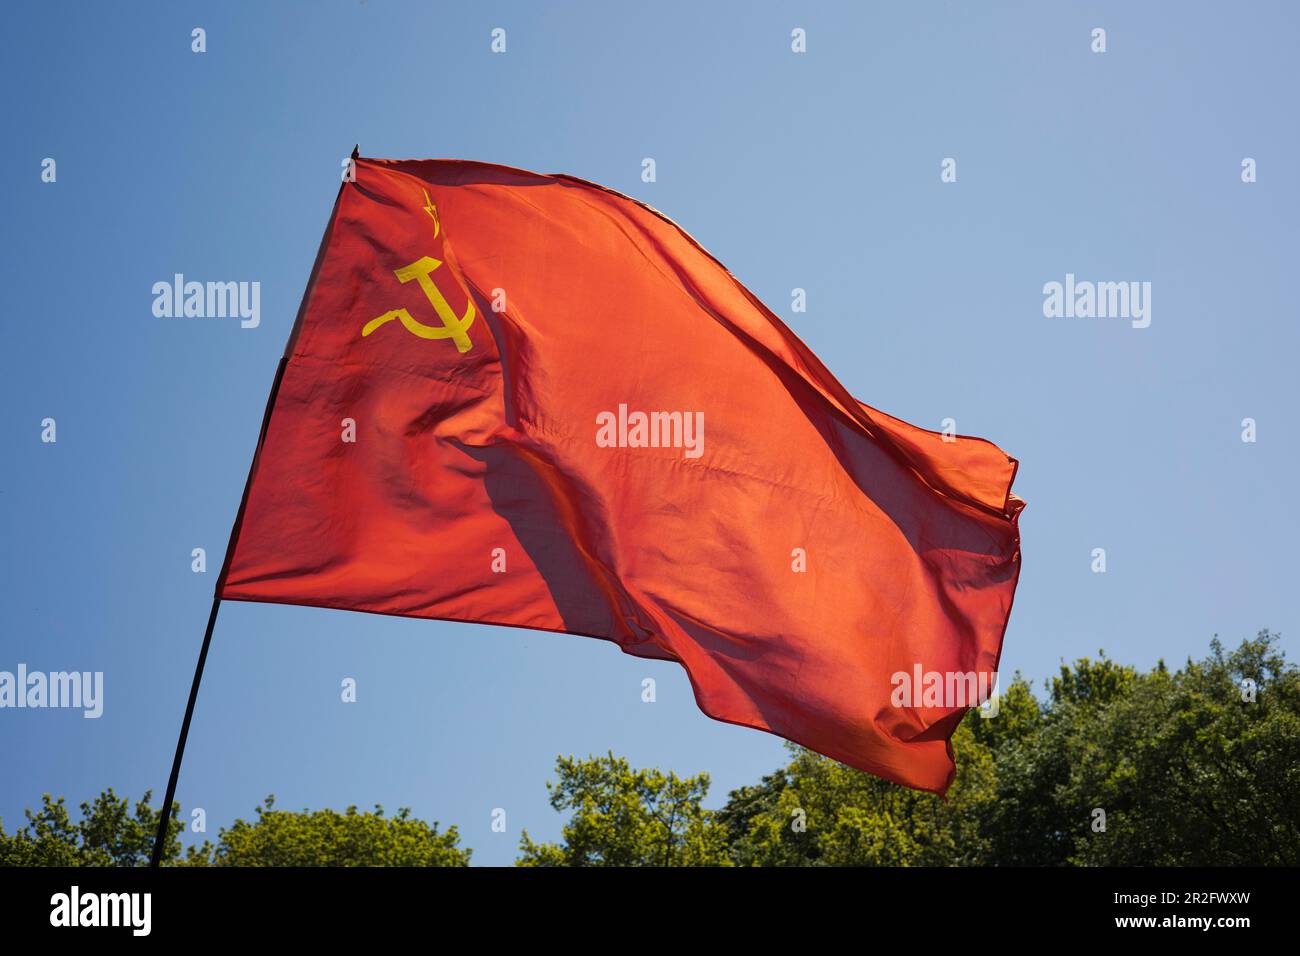 Russian national flag with hammer and sickle waving in the wind, Berlin, Germany Stock Photo